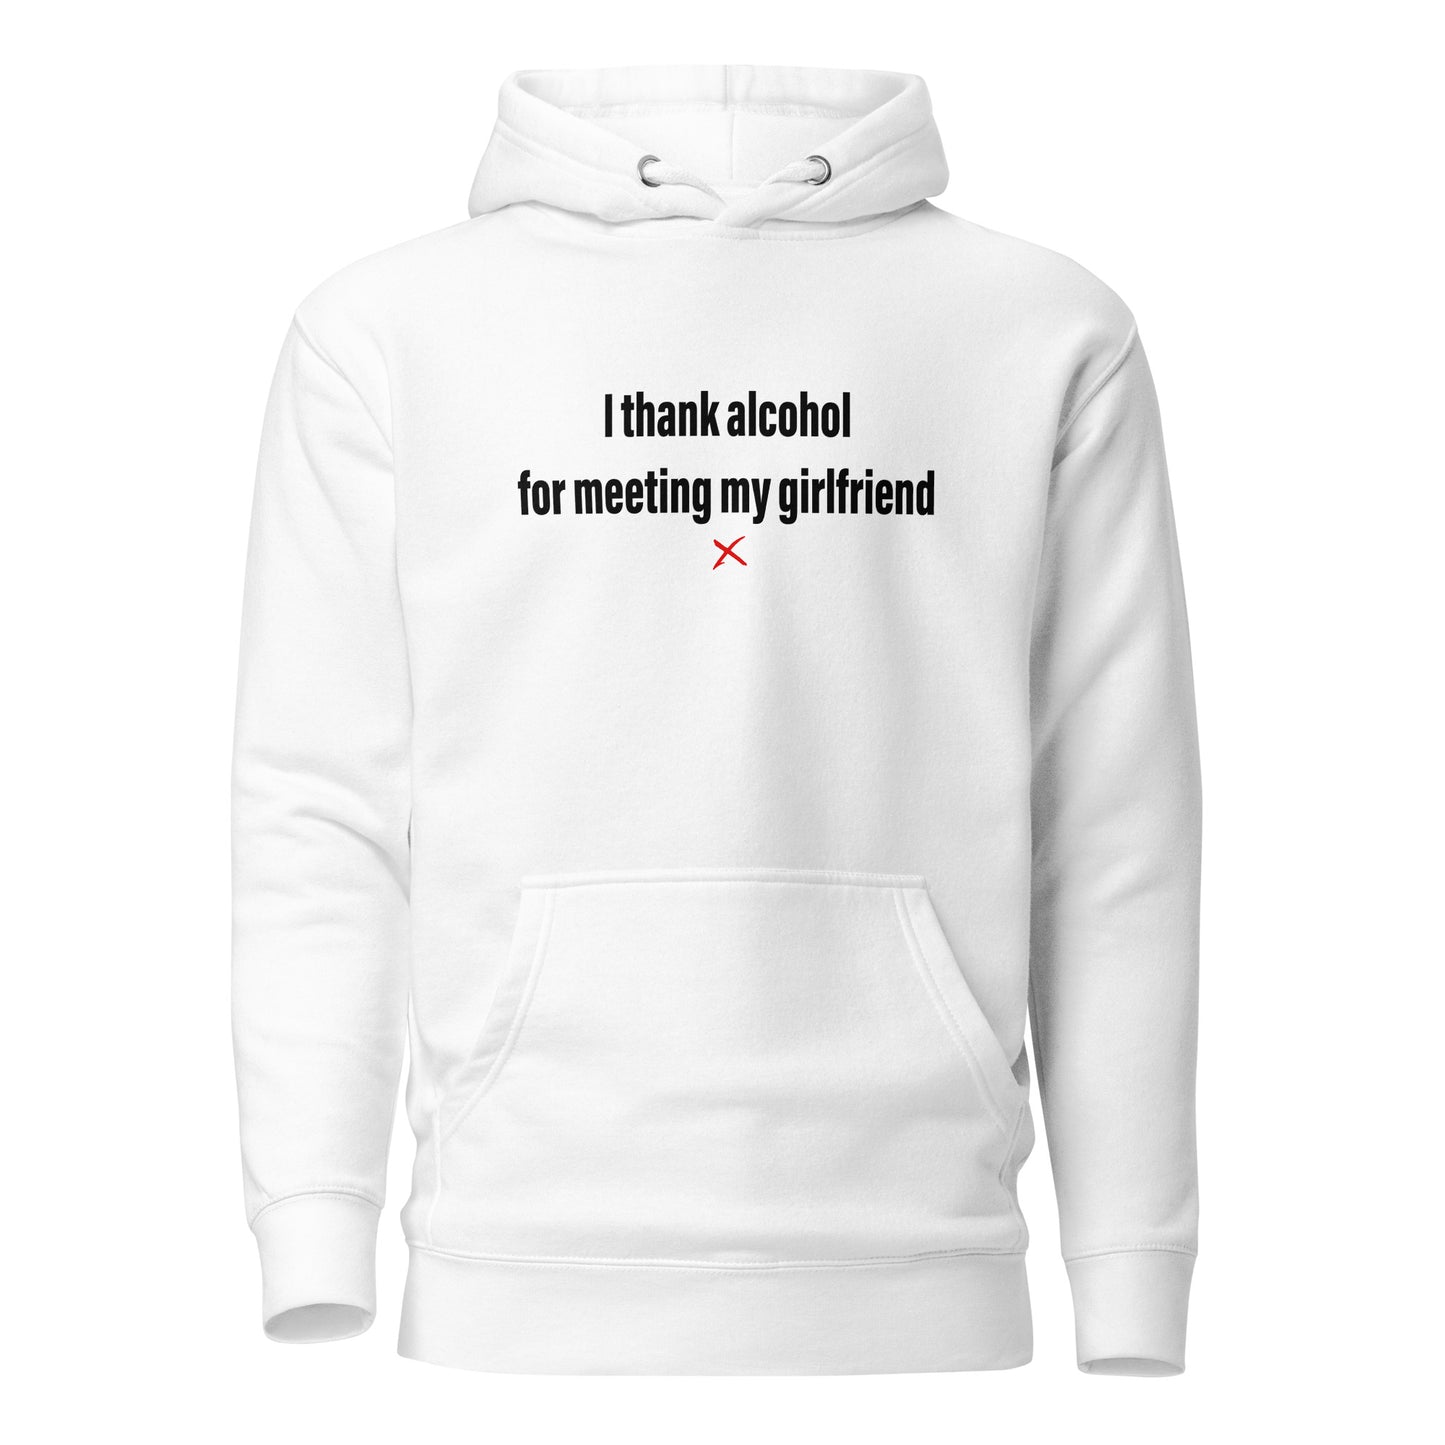 I thank alcohol for meeting my girlfriend - Hoodie